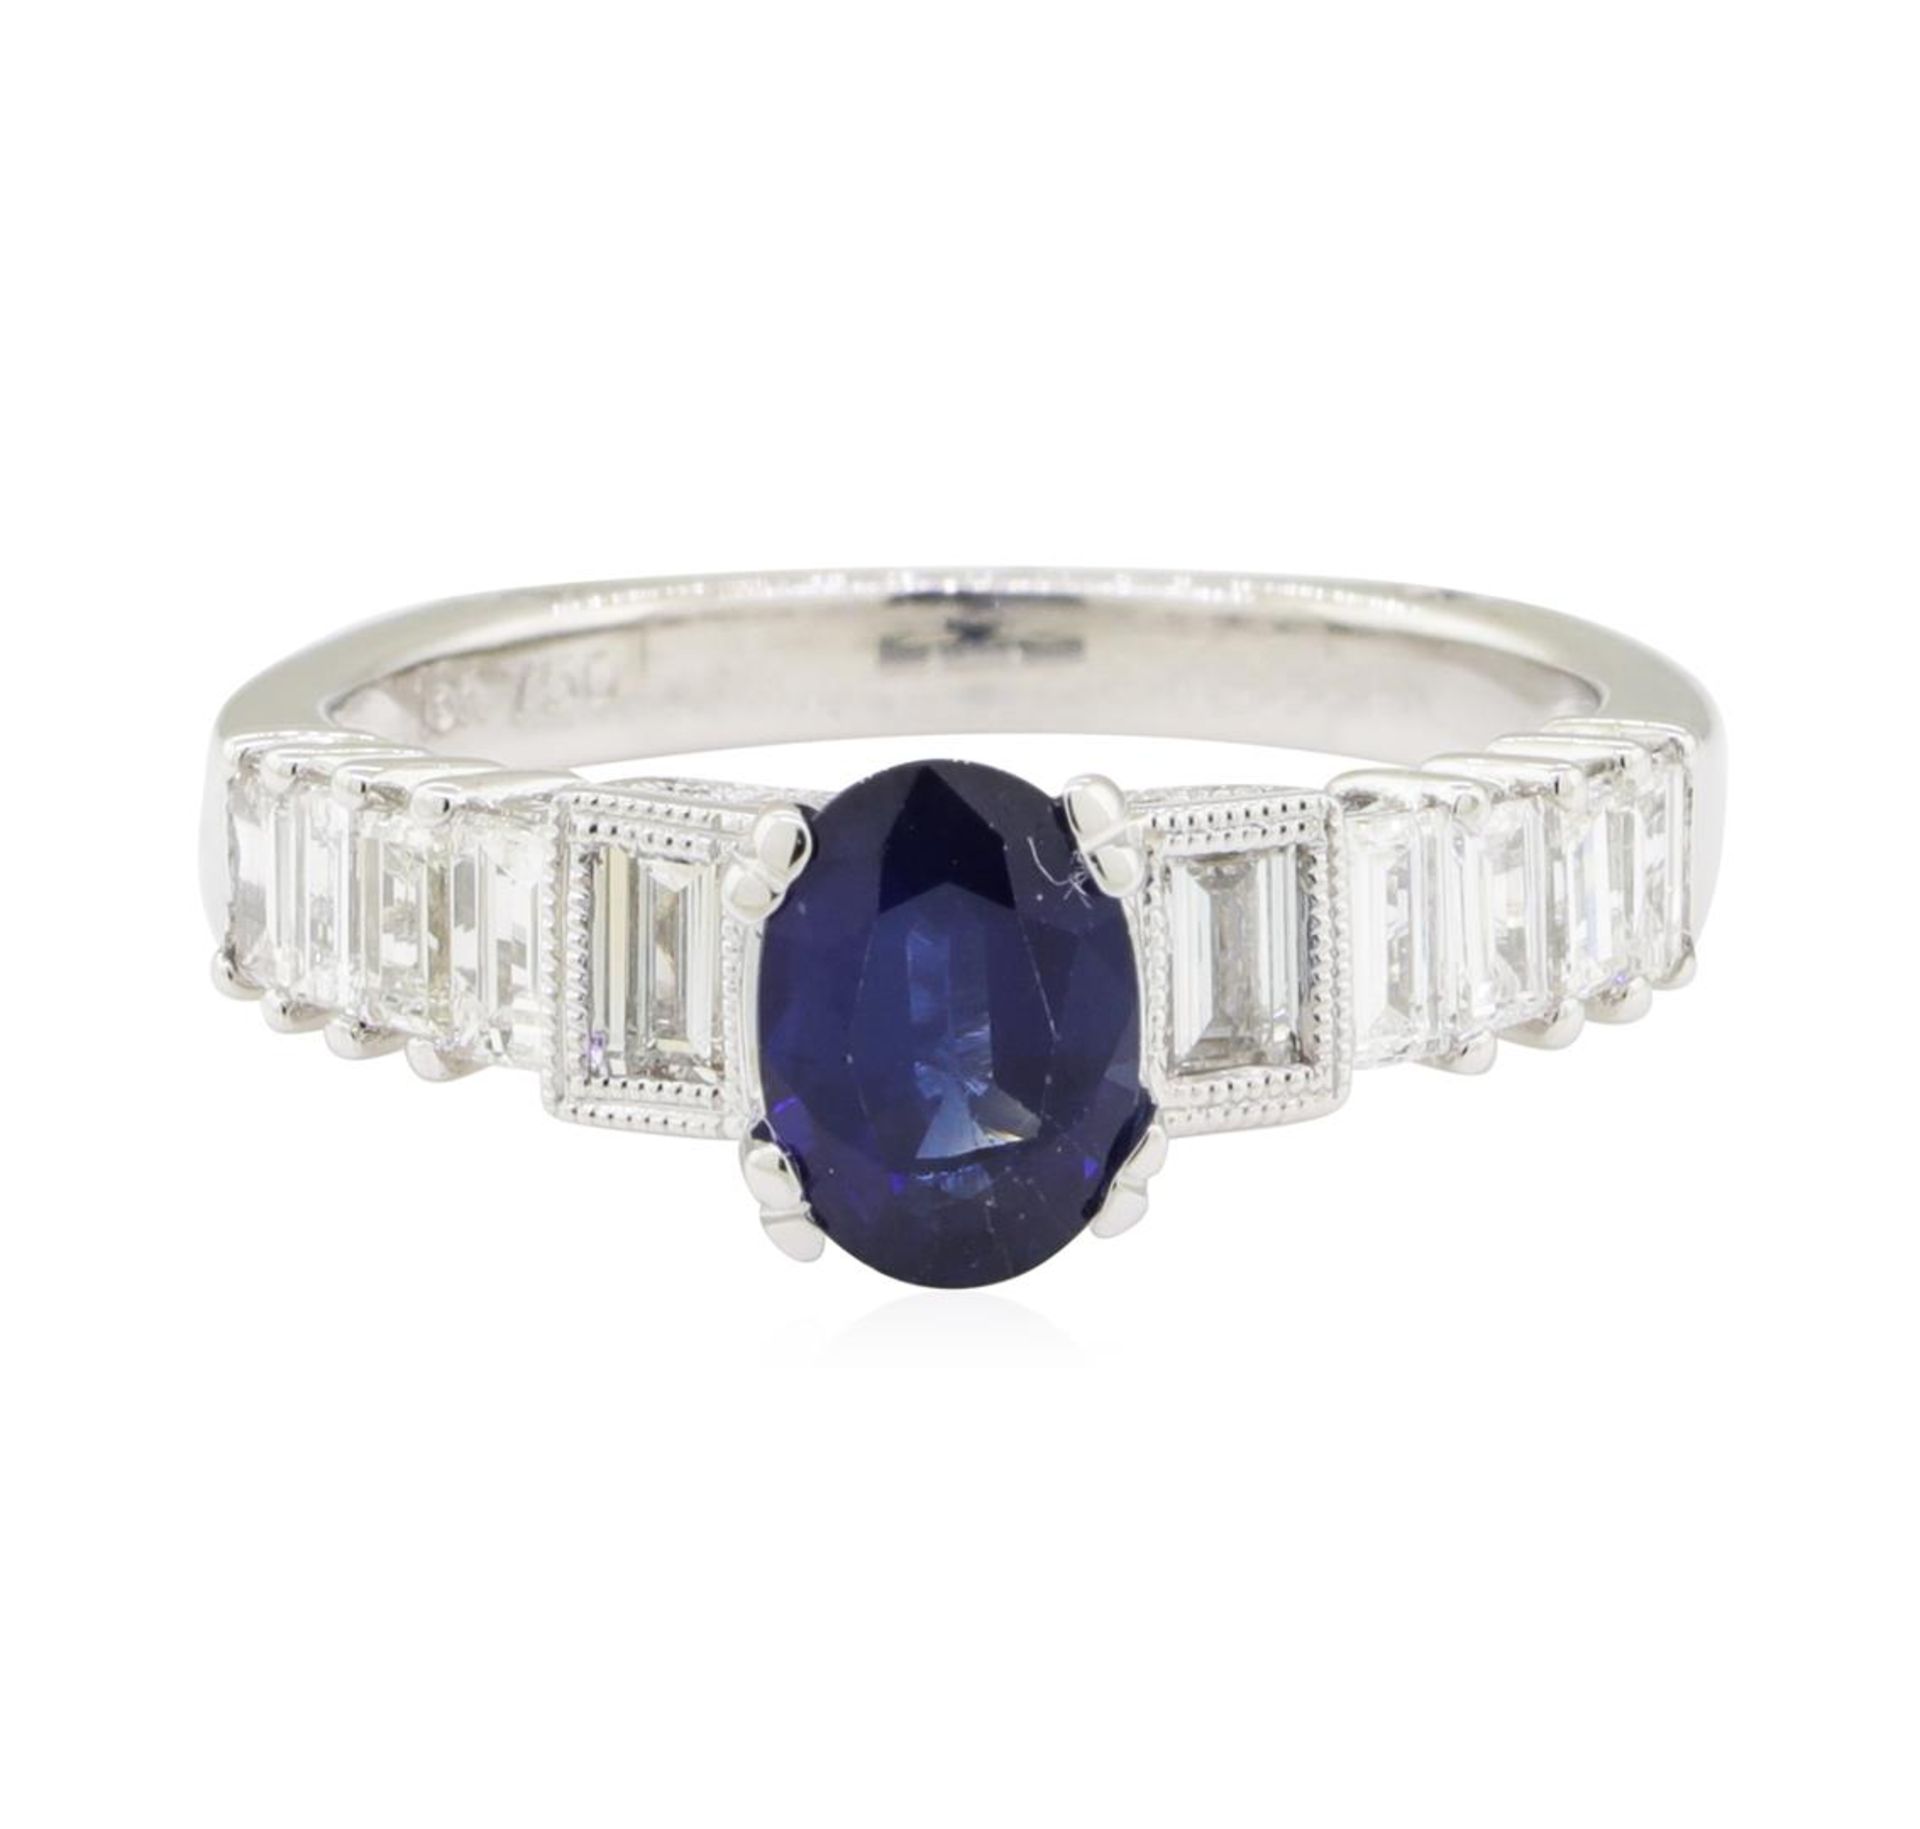 1.85 ctw Sapphire and Diamond Ring - 18KT White Gold - Image 2 of 5